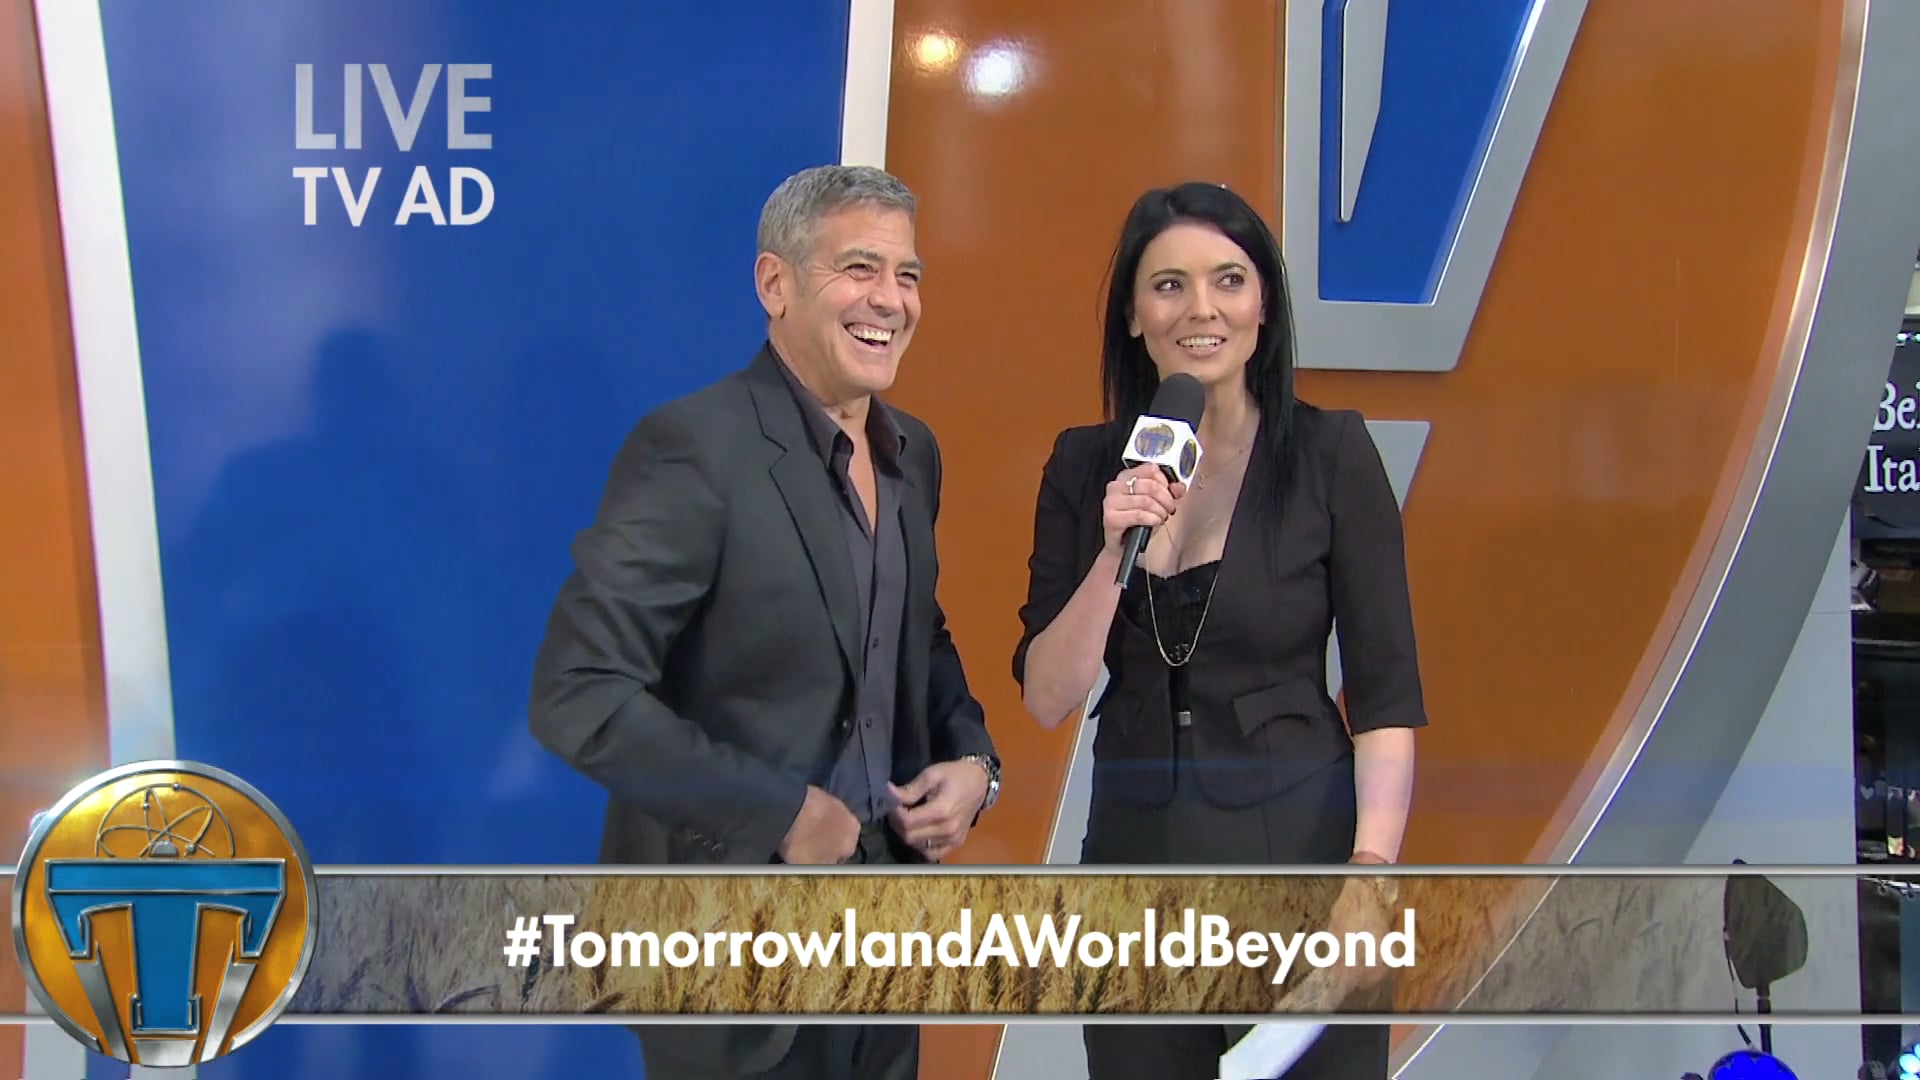 Disney | 'Tomorrowland: A World Beyond' Live Advert with George Clooney